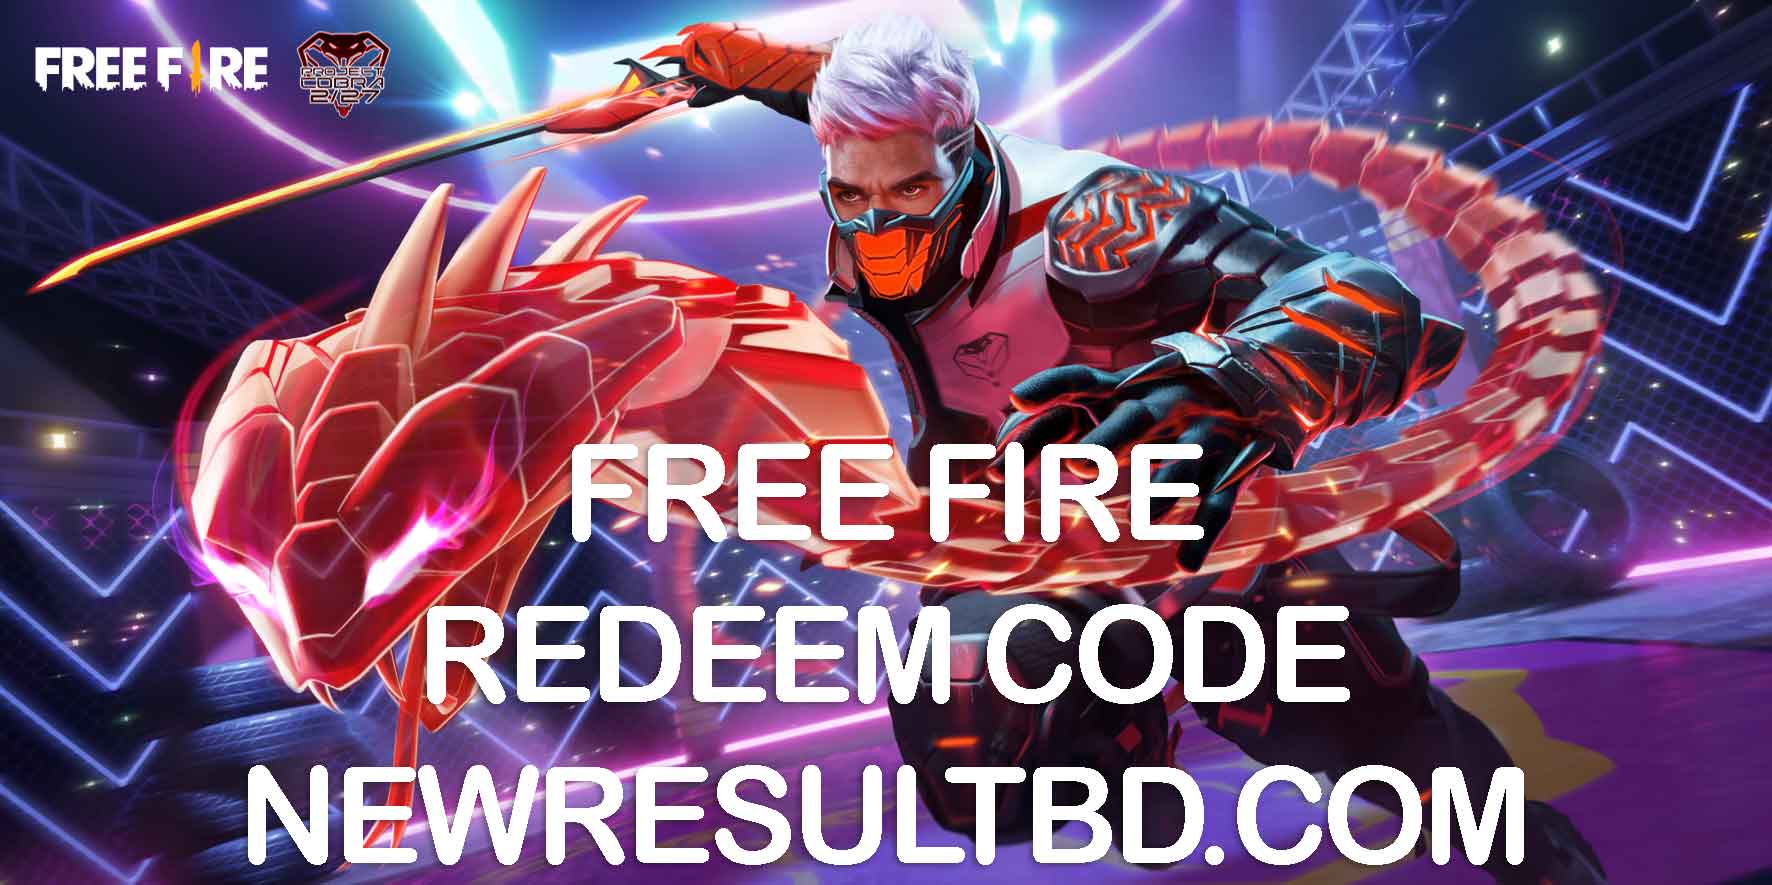 Free fire redeem code today